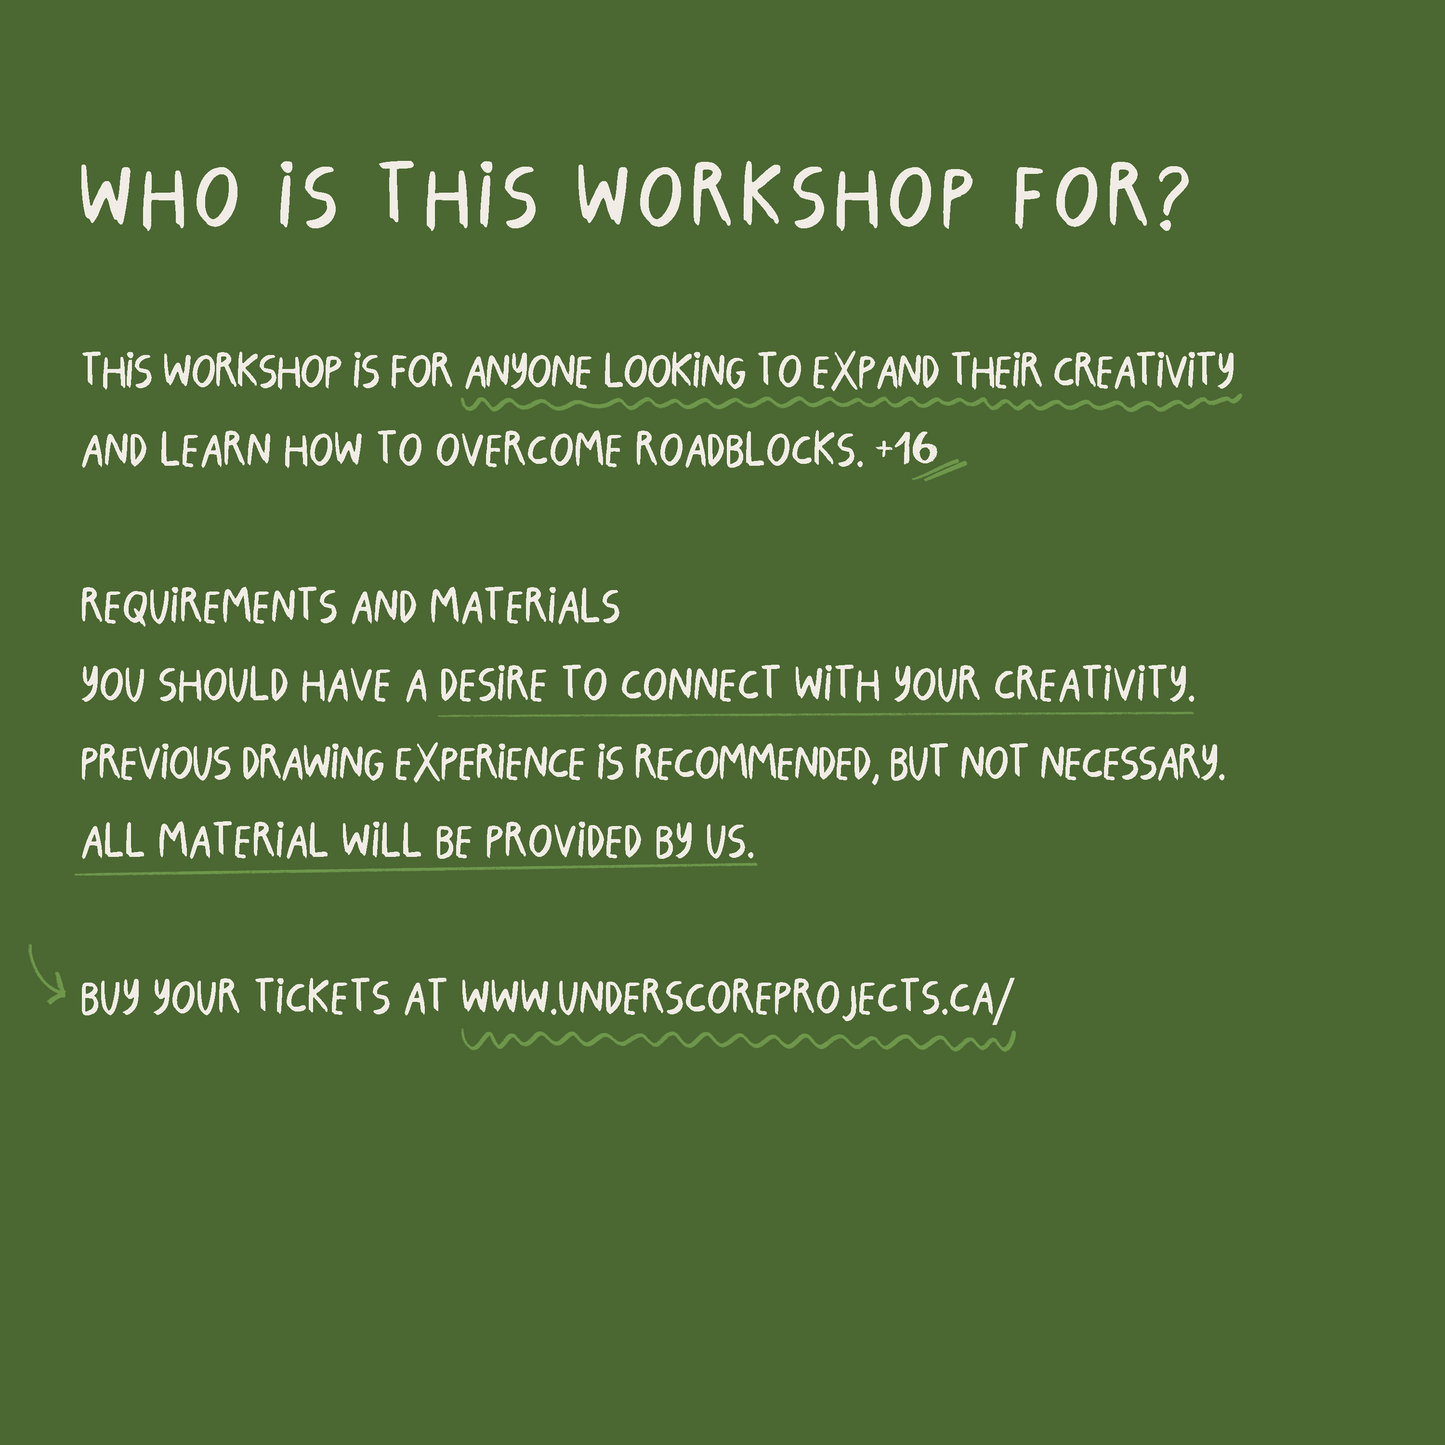 Unleash your creativity Workshop | Find ways to your own creative process